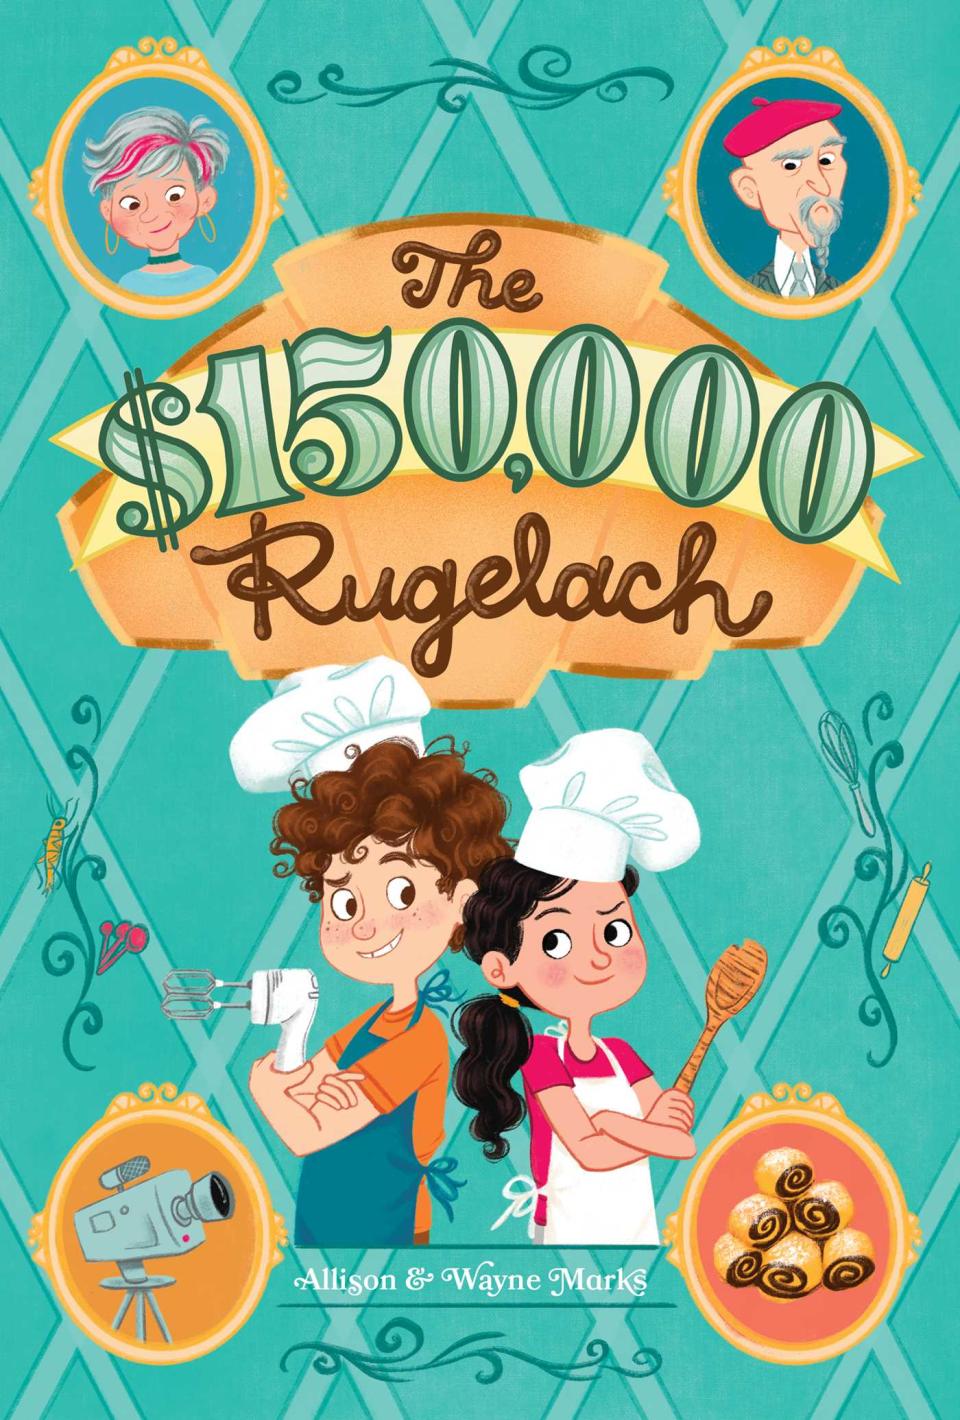 “The $150,000 Rugelach”